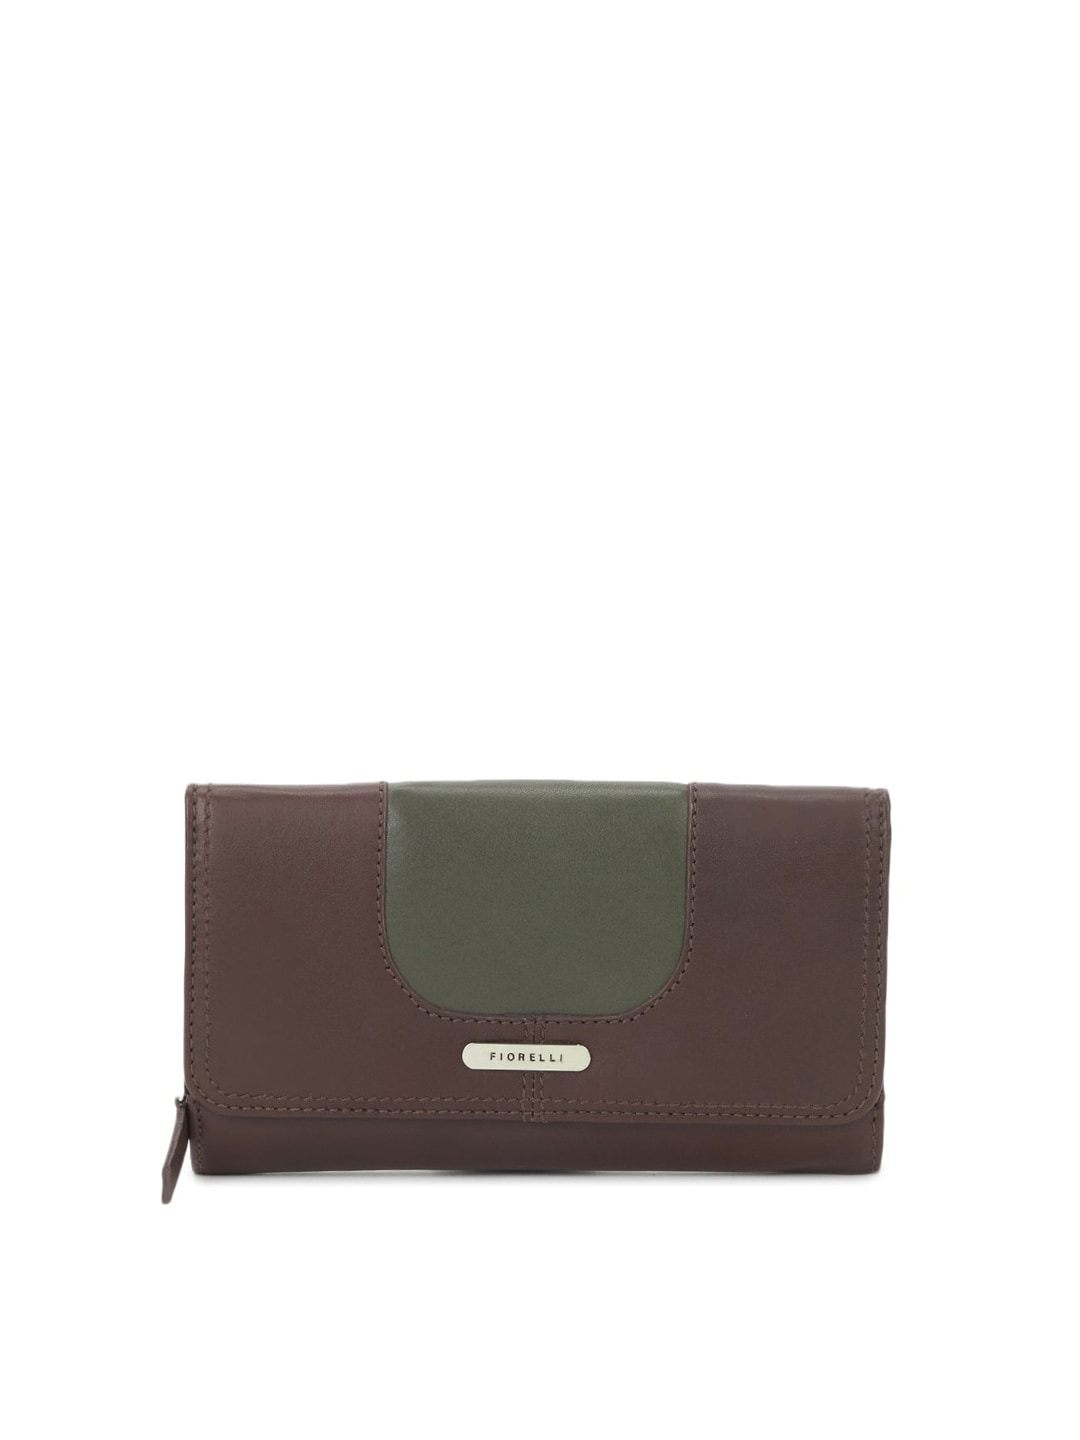 Fiorelli Women Chocolate Brown and Olive Green Wallet